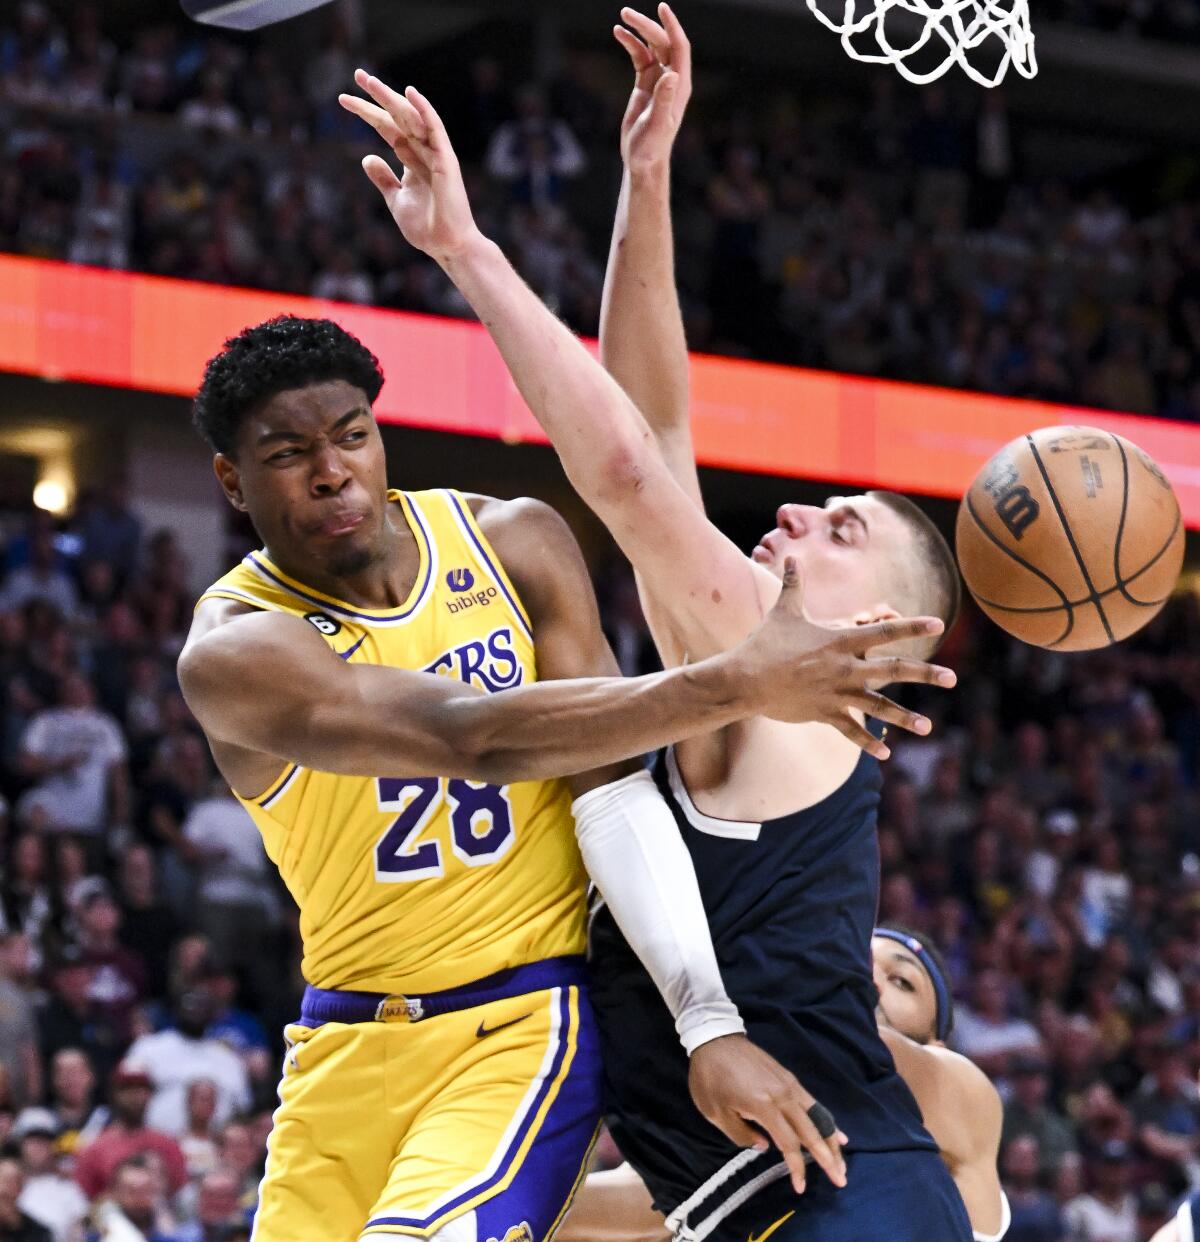 Lakers forward Rui Hachimura passes the ball around Nuggets center Nikola Jokic on a drive to the basket.